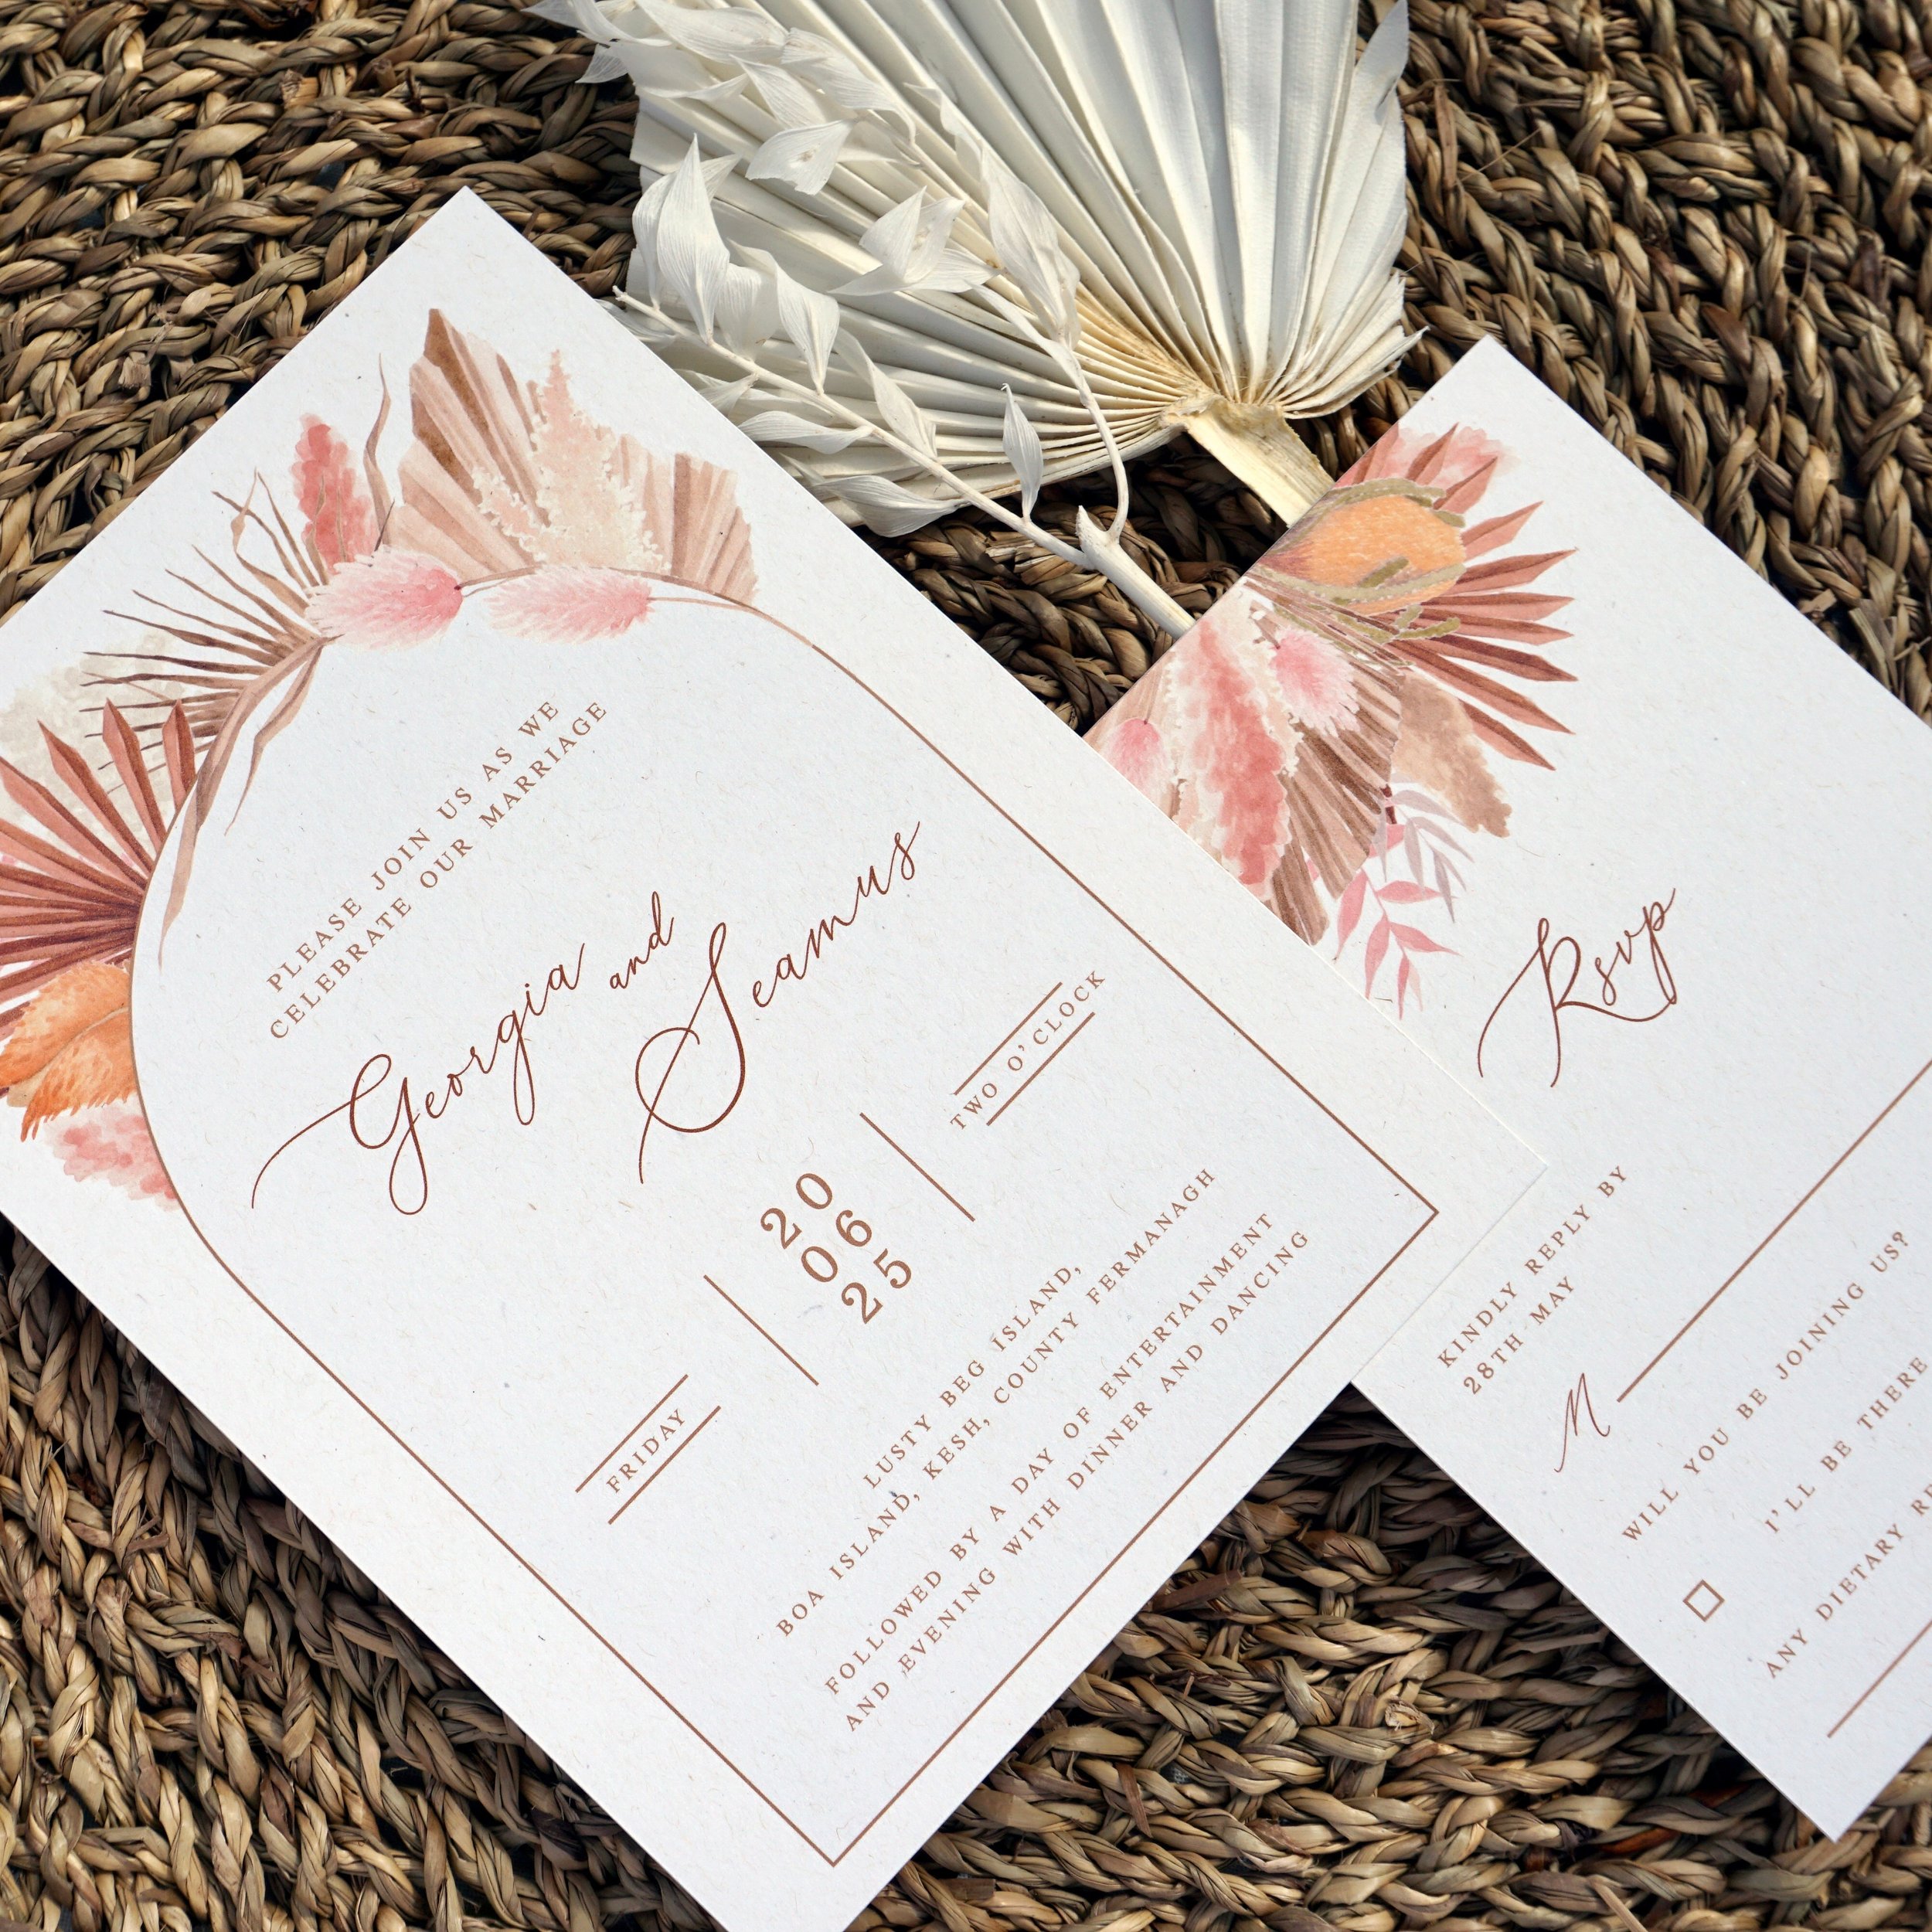 GEORGIA - This one is for all the boho lovers out there. Autumnal tones on eco, recycled cardstock, just add dried flowers and boom..... a beautiful bohemian wedding!
.
.
.
#weddingstationerysample #samplestationery #weddingstationery #gettingmarried